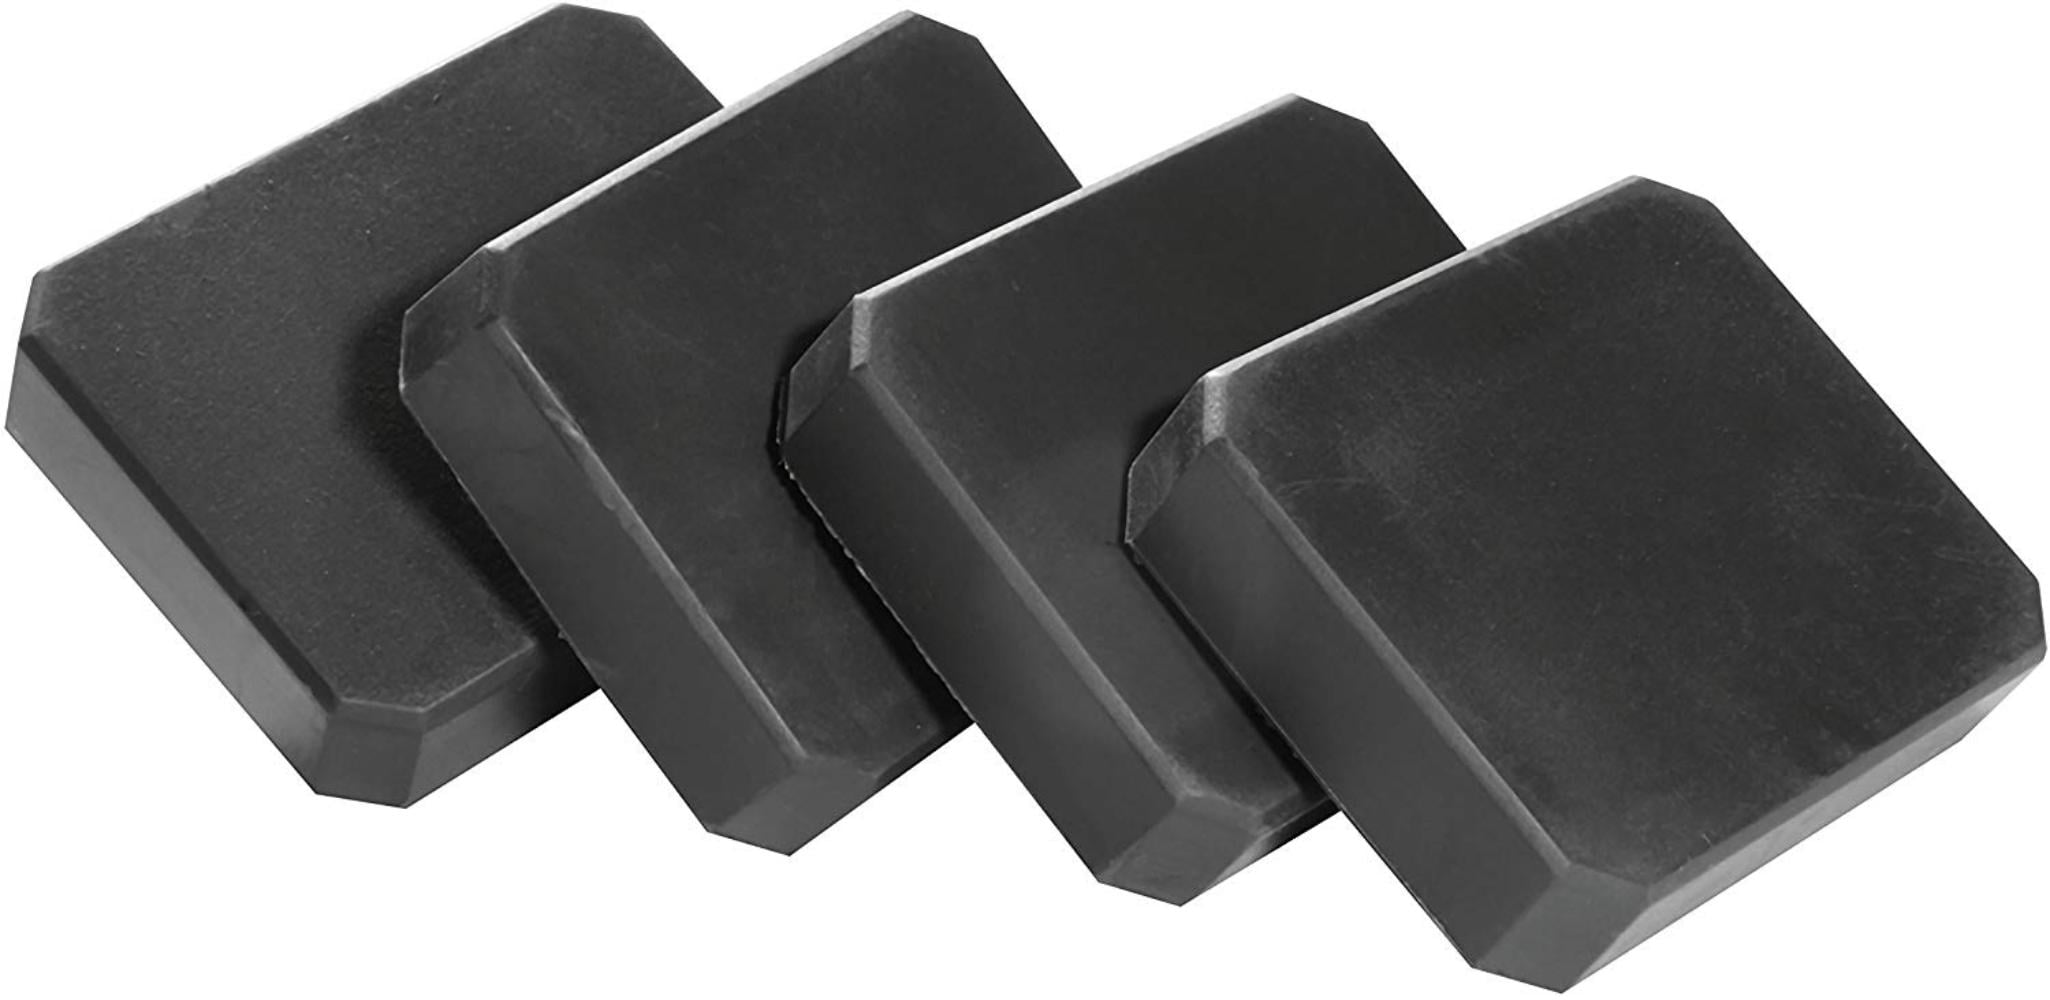 4-Pack S IRWIN Irwin Tools IW1826577 Quick-Grip Replacement Pads for SL300 Clamps 